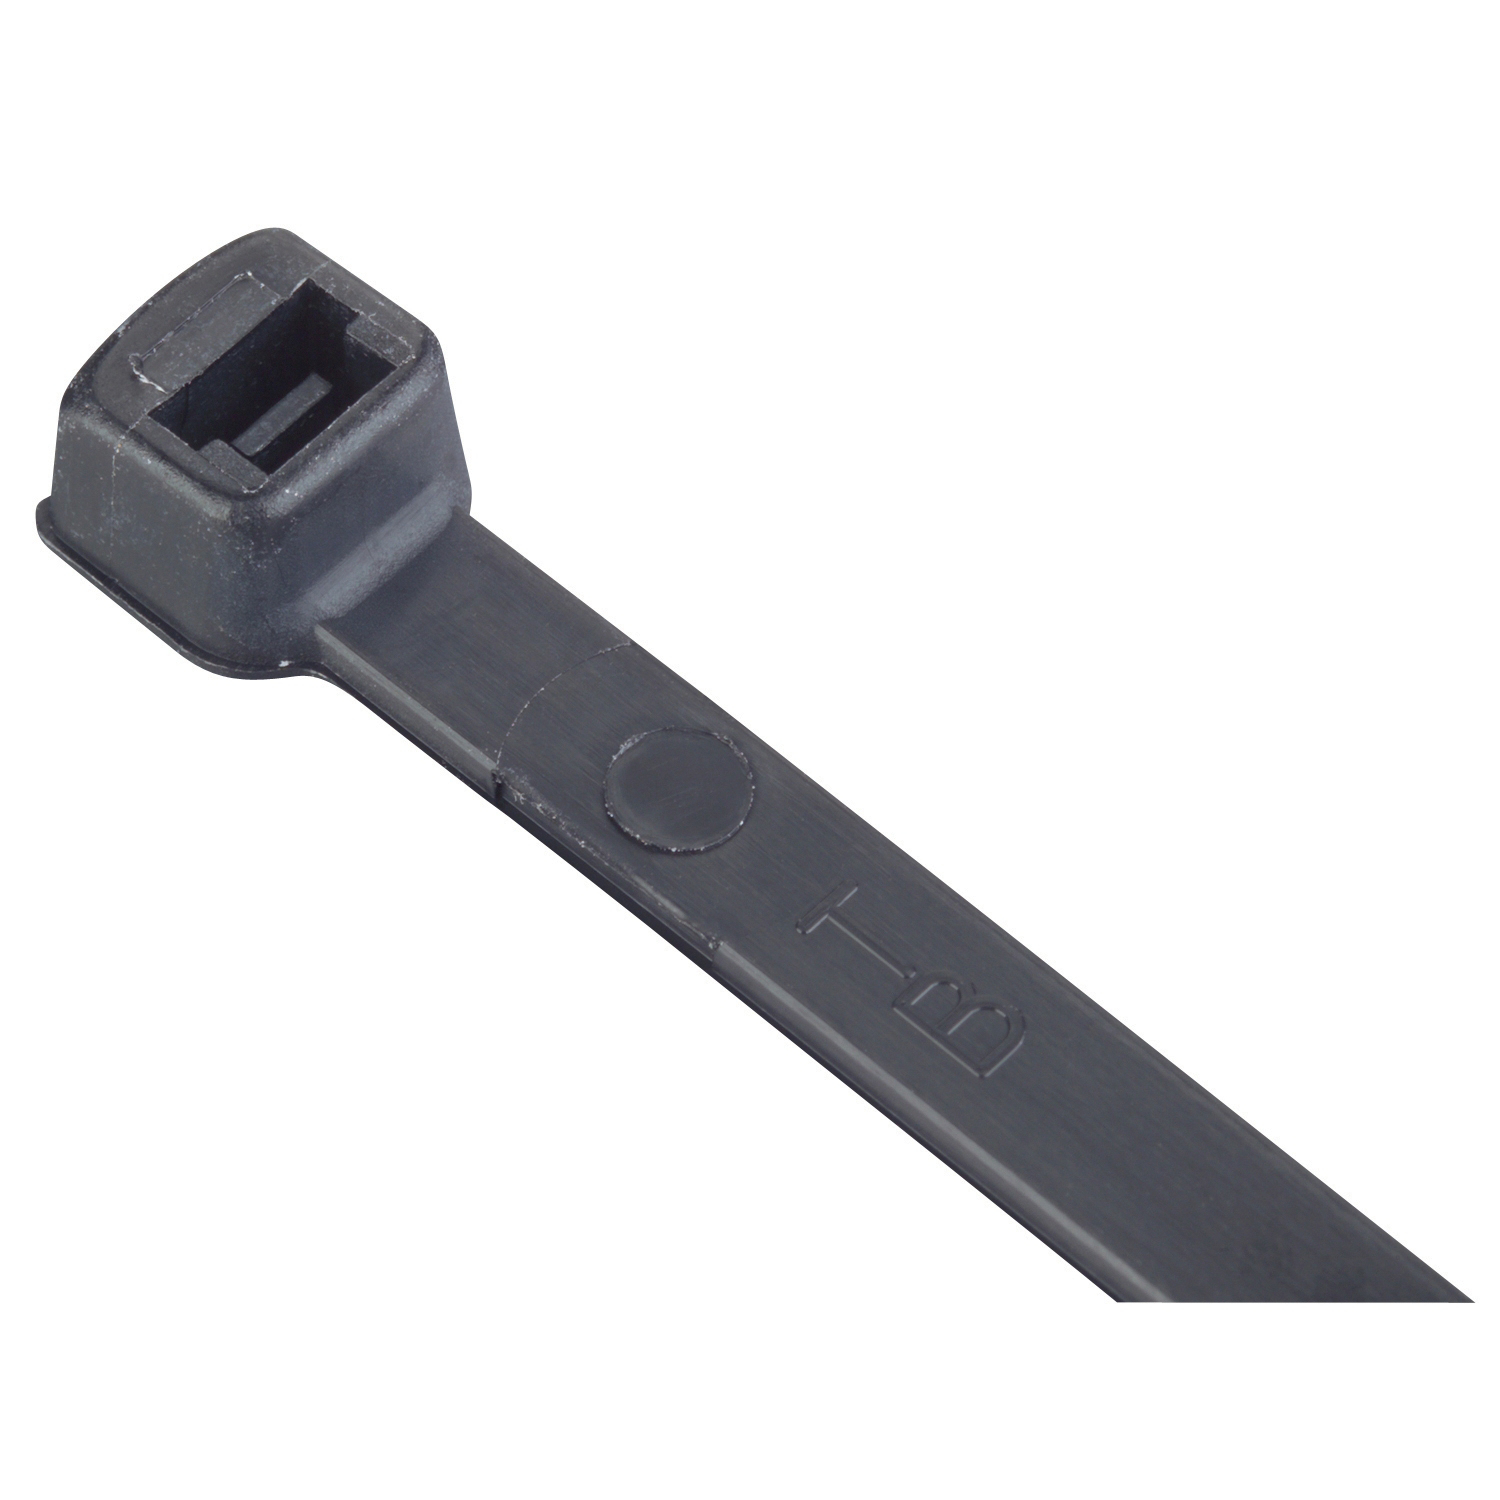 L-11-40-0-D Cable Tie Catamount;ABB - Installation Products